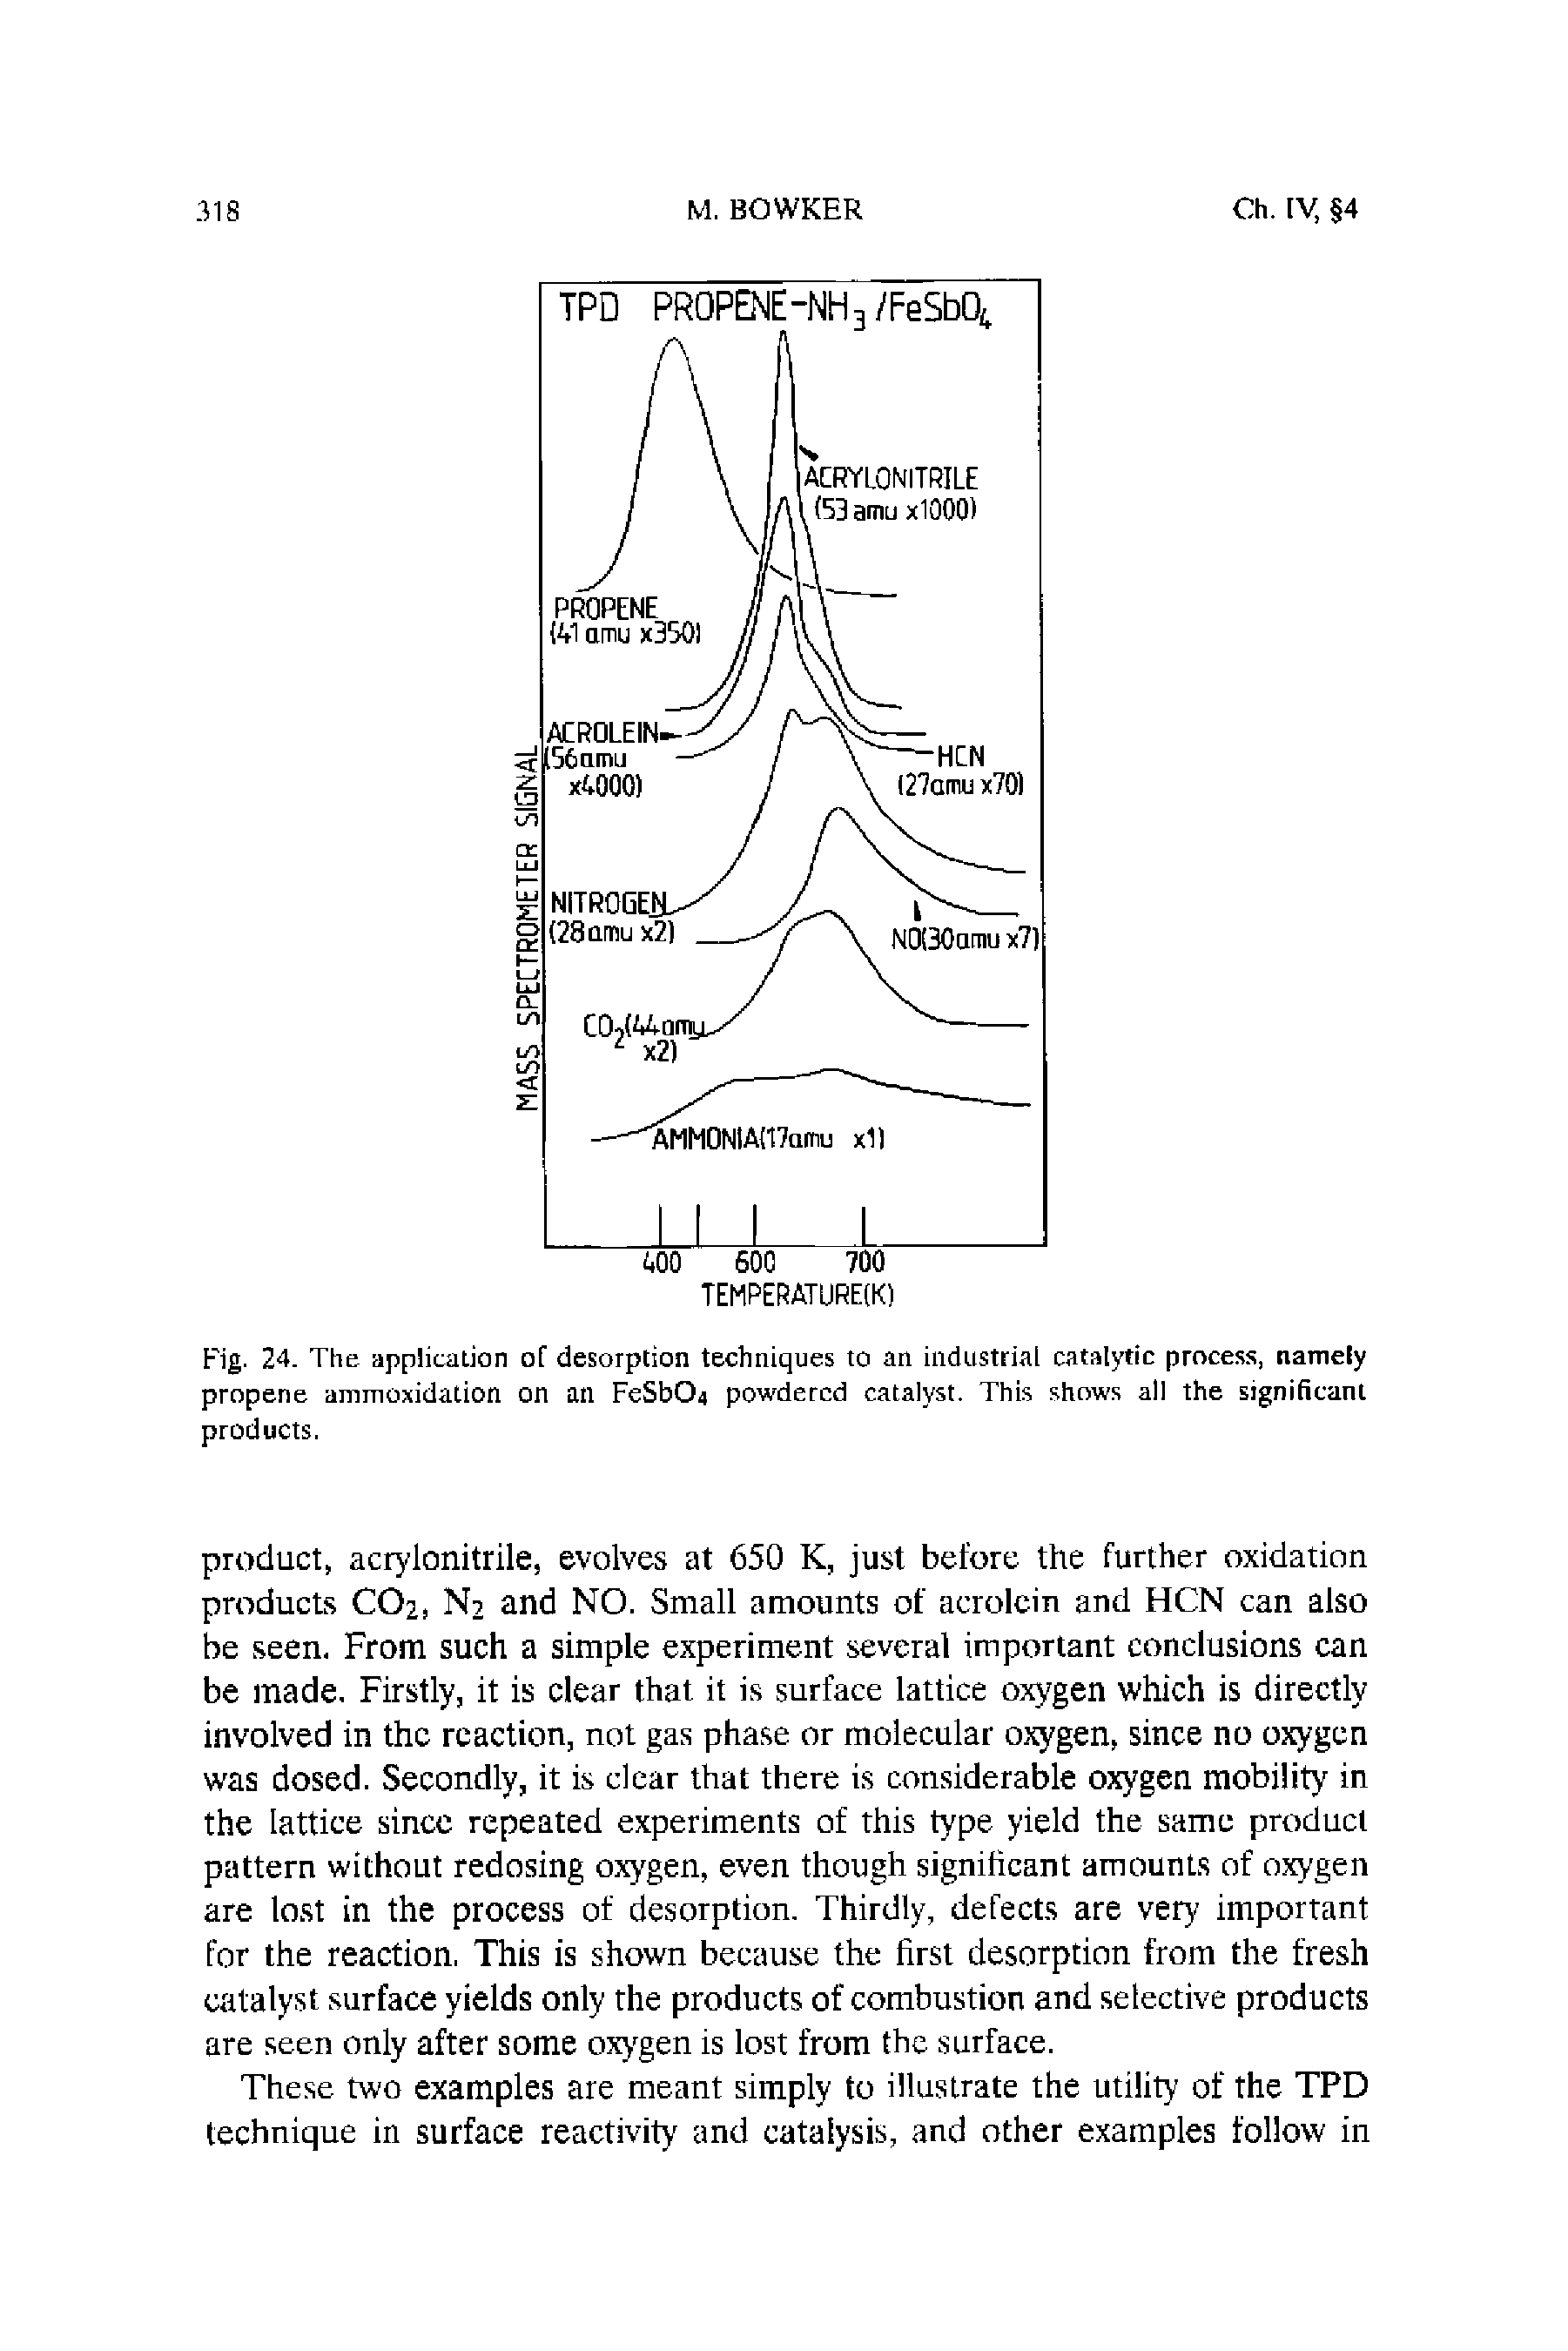 Fig. 24. The application of desorption techniques to an industrial catalytic process, namely propene ammoxidation on an FeSbC 4 powdered catalyst. This shows all the significant products.